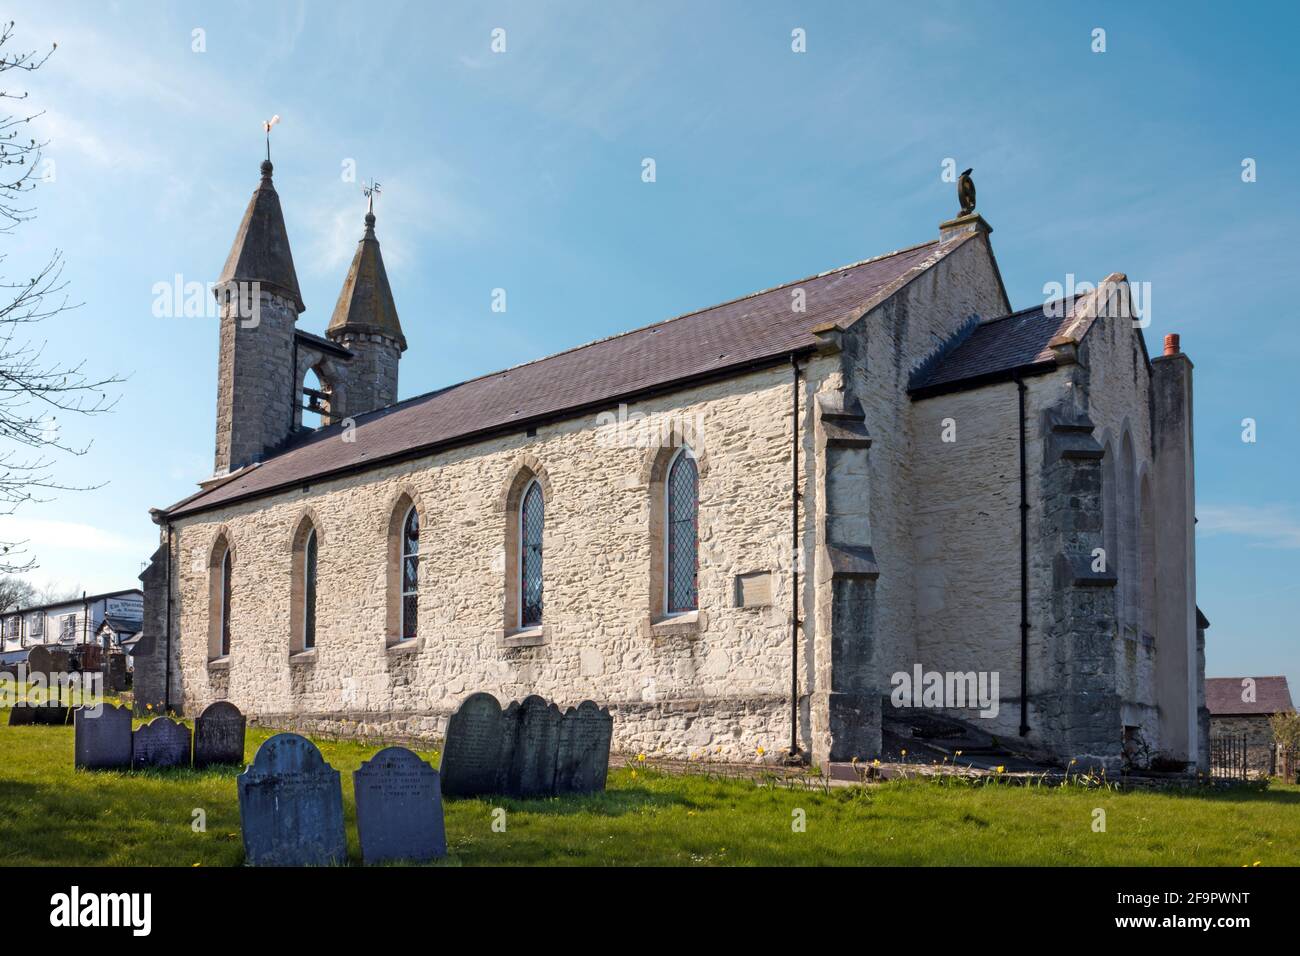 Parish Church of St Michael is a Grade II Listed Building in Betws-yn-Rhos, Conwy, North Wales. The building replaced a medieval church in 1838/9. Stock Photo